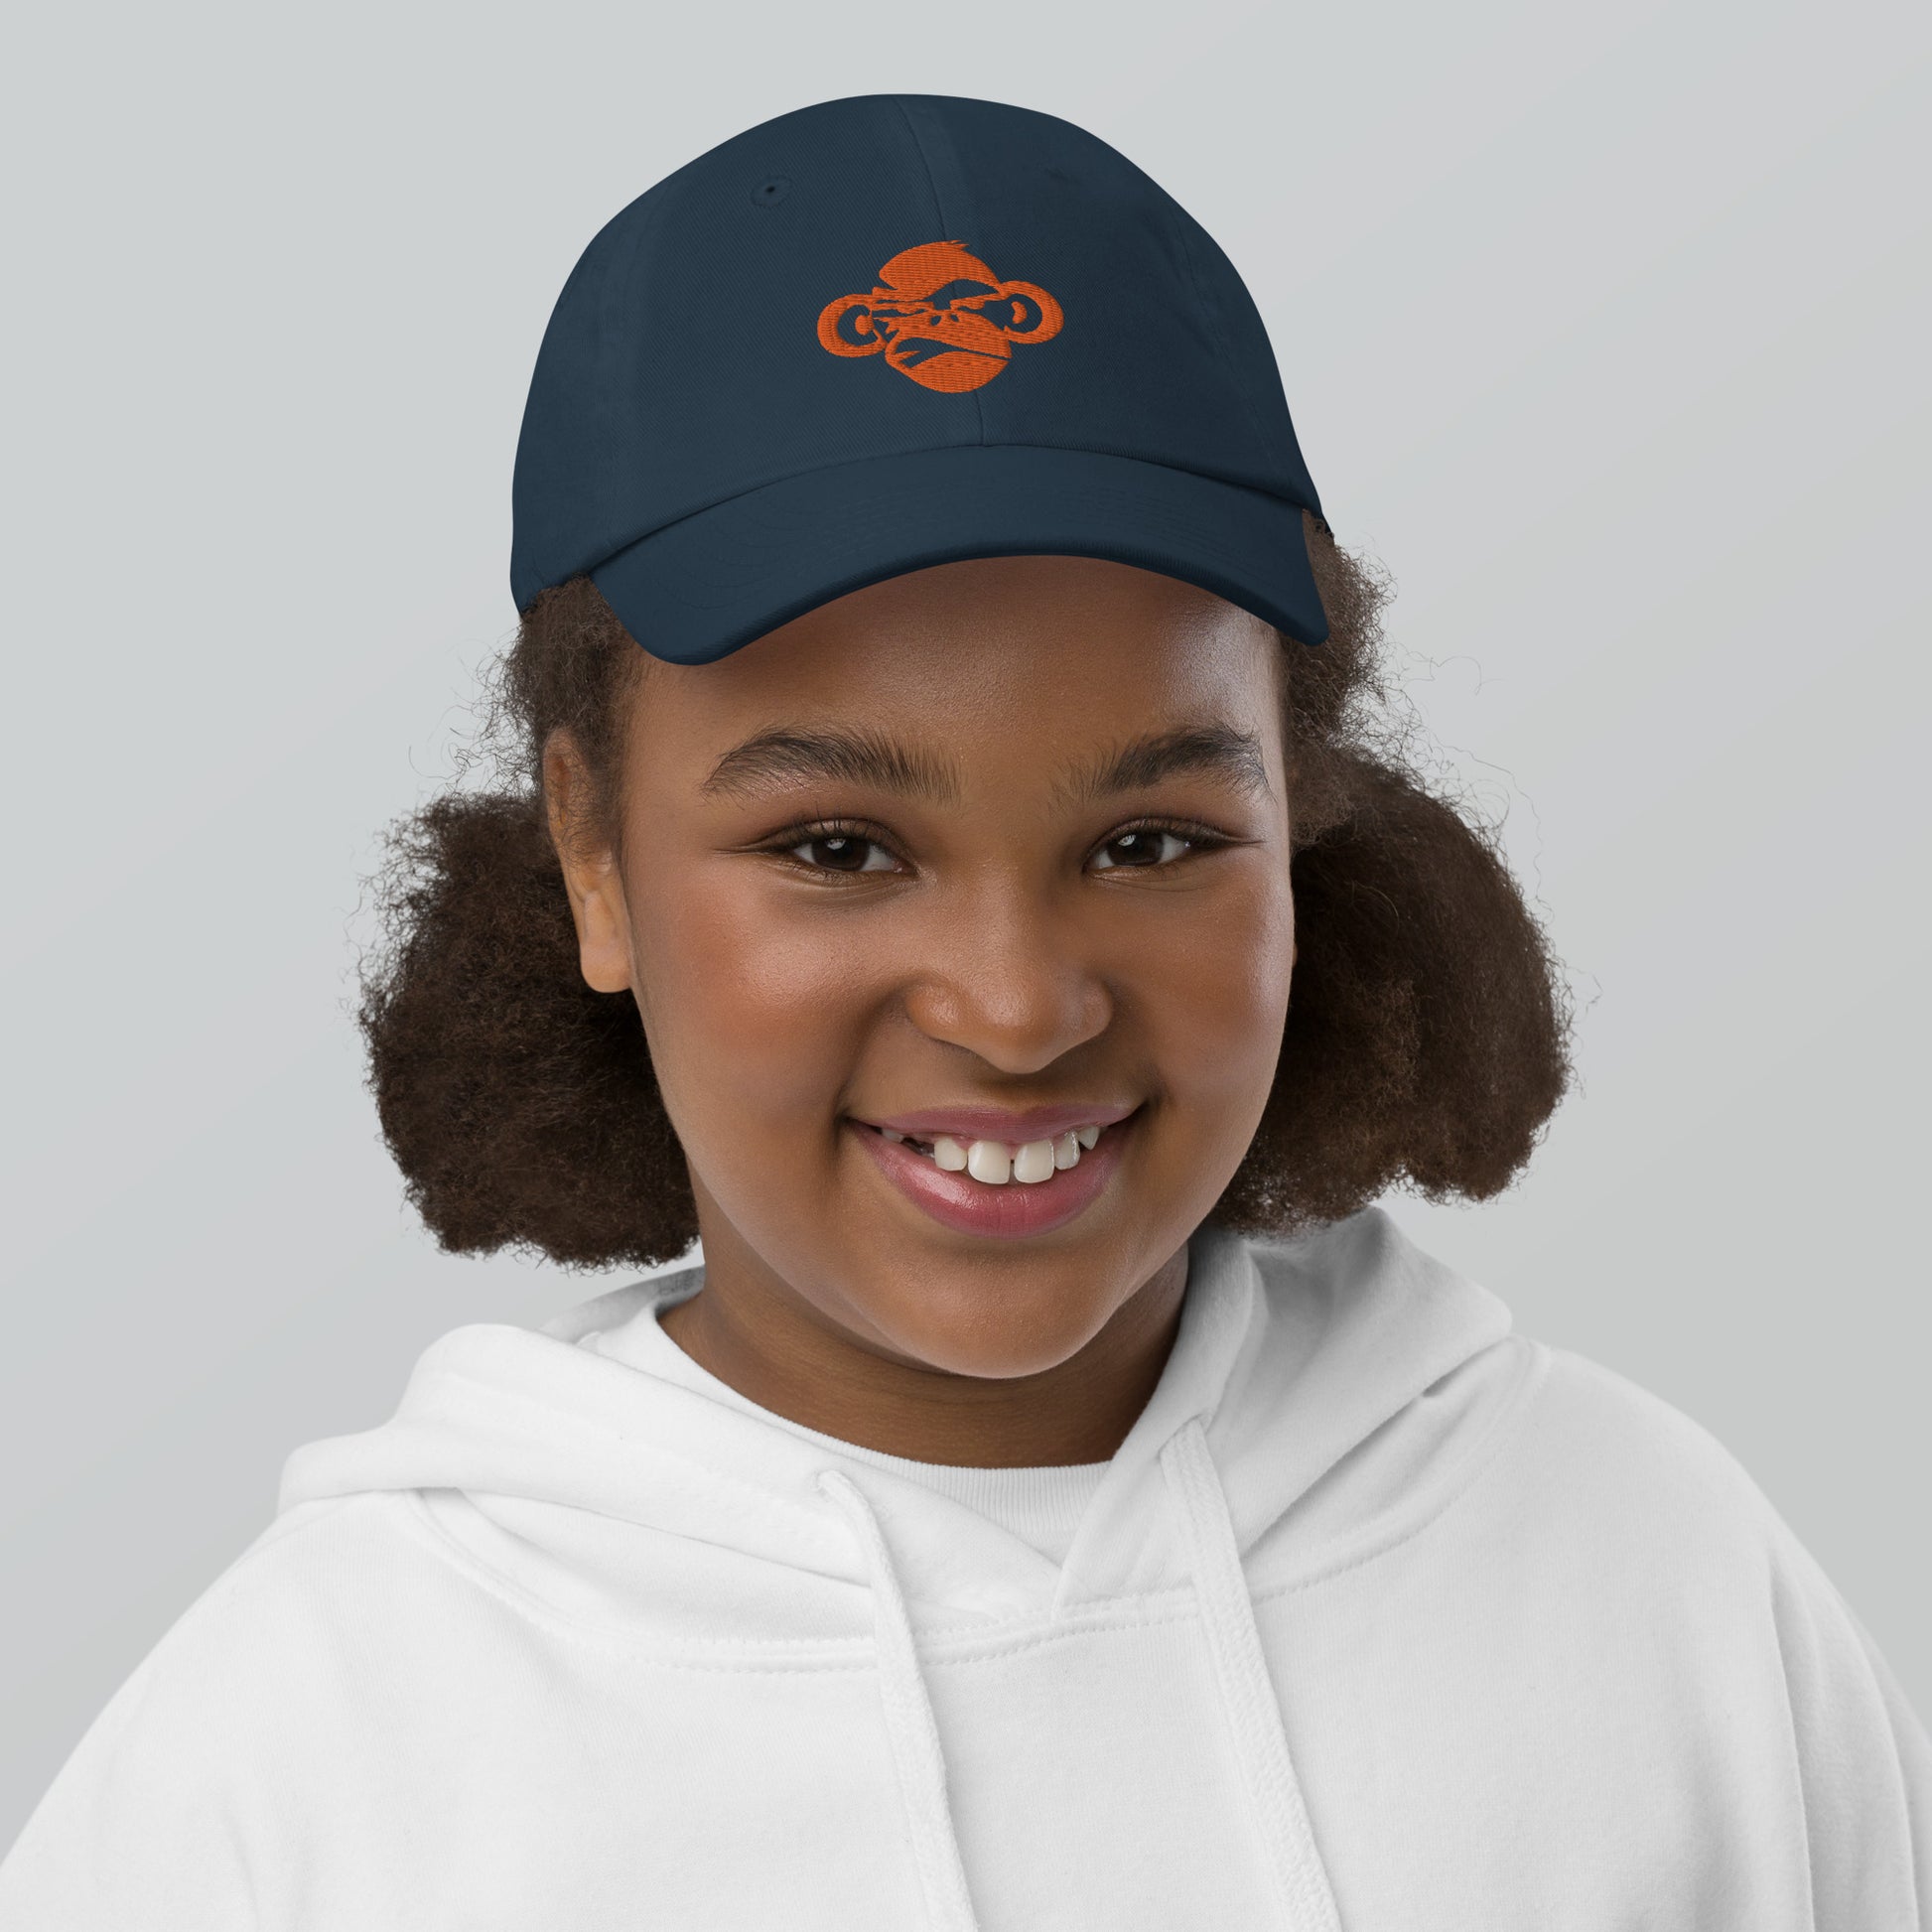 Youth with navy baseball cap with a print of a head of a monkey in color brown